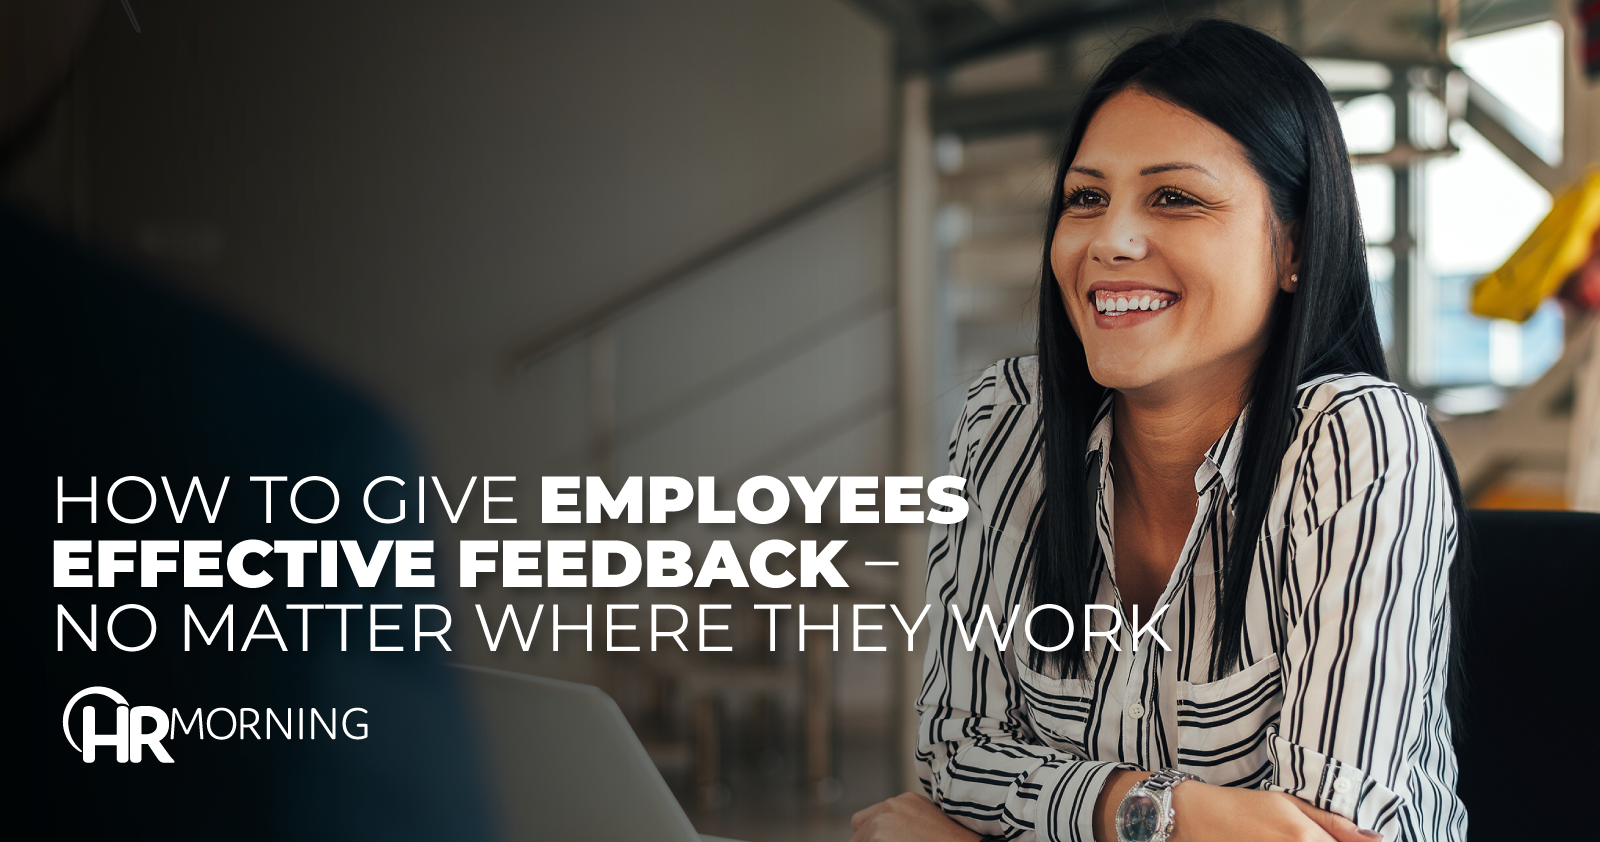 How To Give Employees Effective Feedback No Matter Where They Work